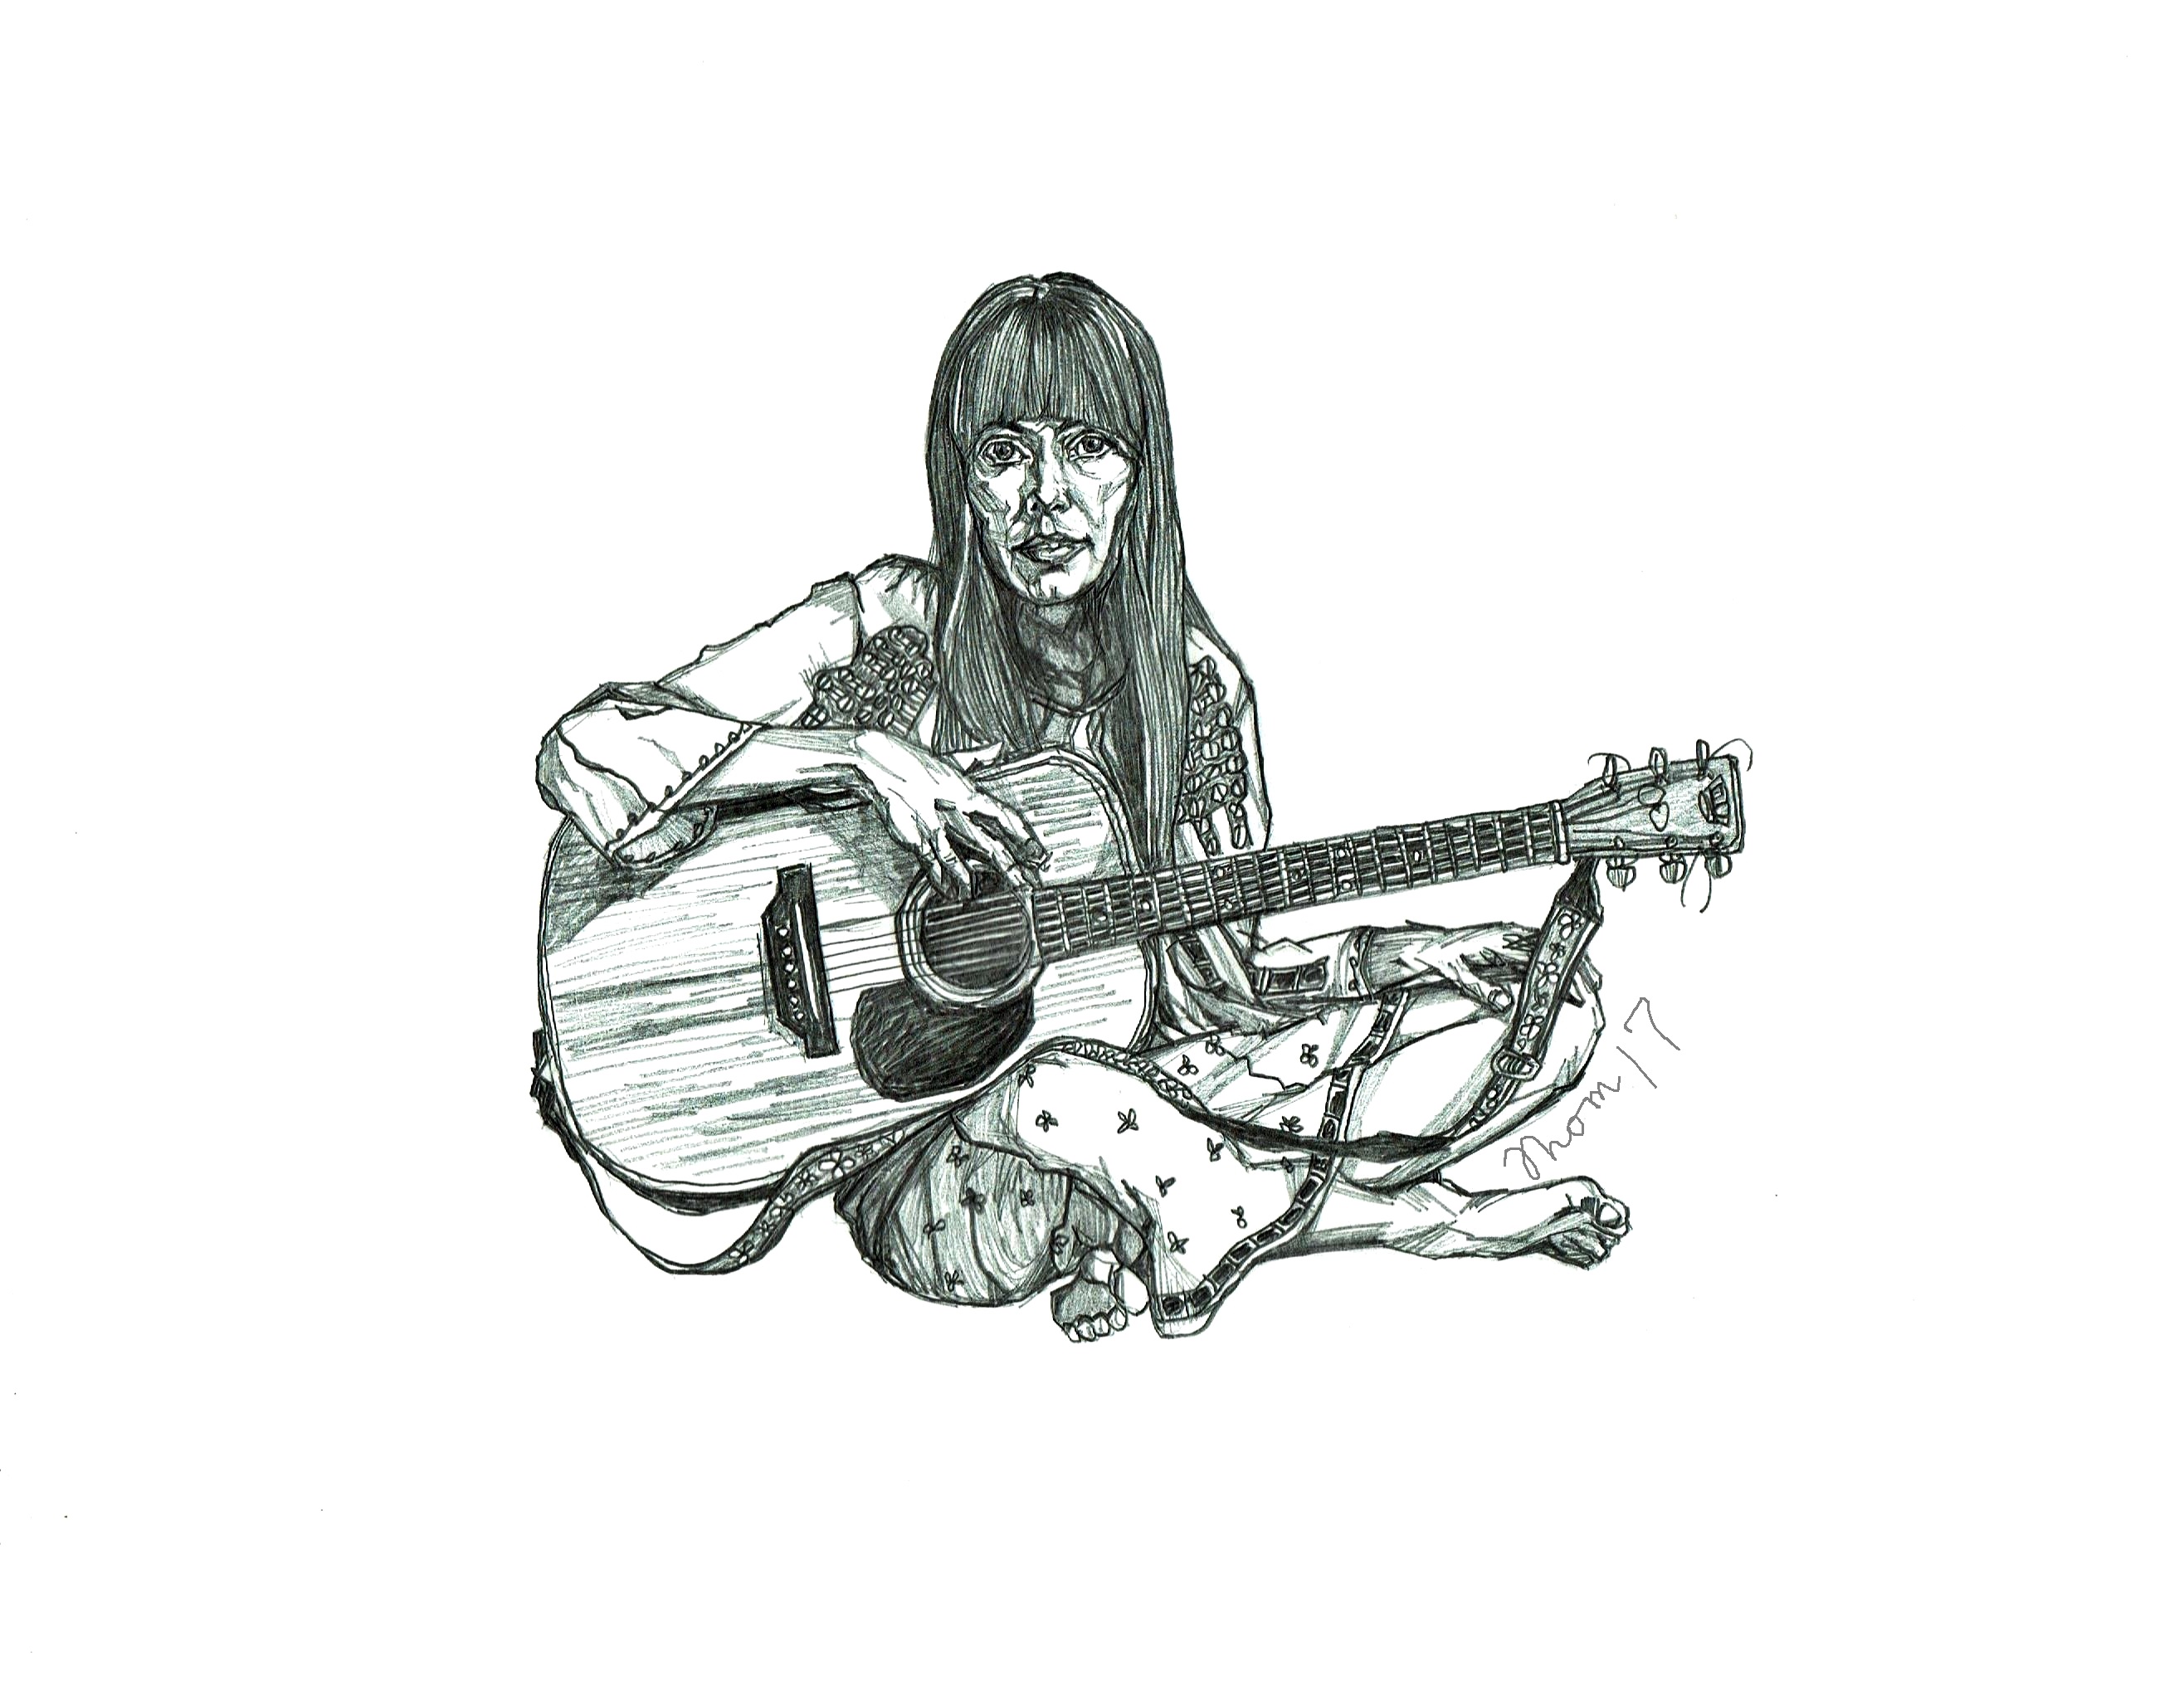  <em>When I first saw your gallery, I liked the ones of ladies (Joni Mitchell)</em>, 2017<br /> Thom Kofoed<br /> Pencil,10x8in<em>When I first saw your gallery, I liked the ones of ladies (Joni Mitchell)</em>, 2017<br /> Thom Kofoed<br /> Pencil,10x8in